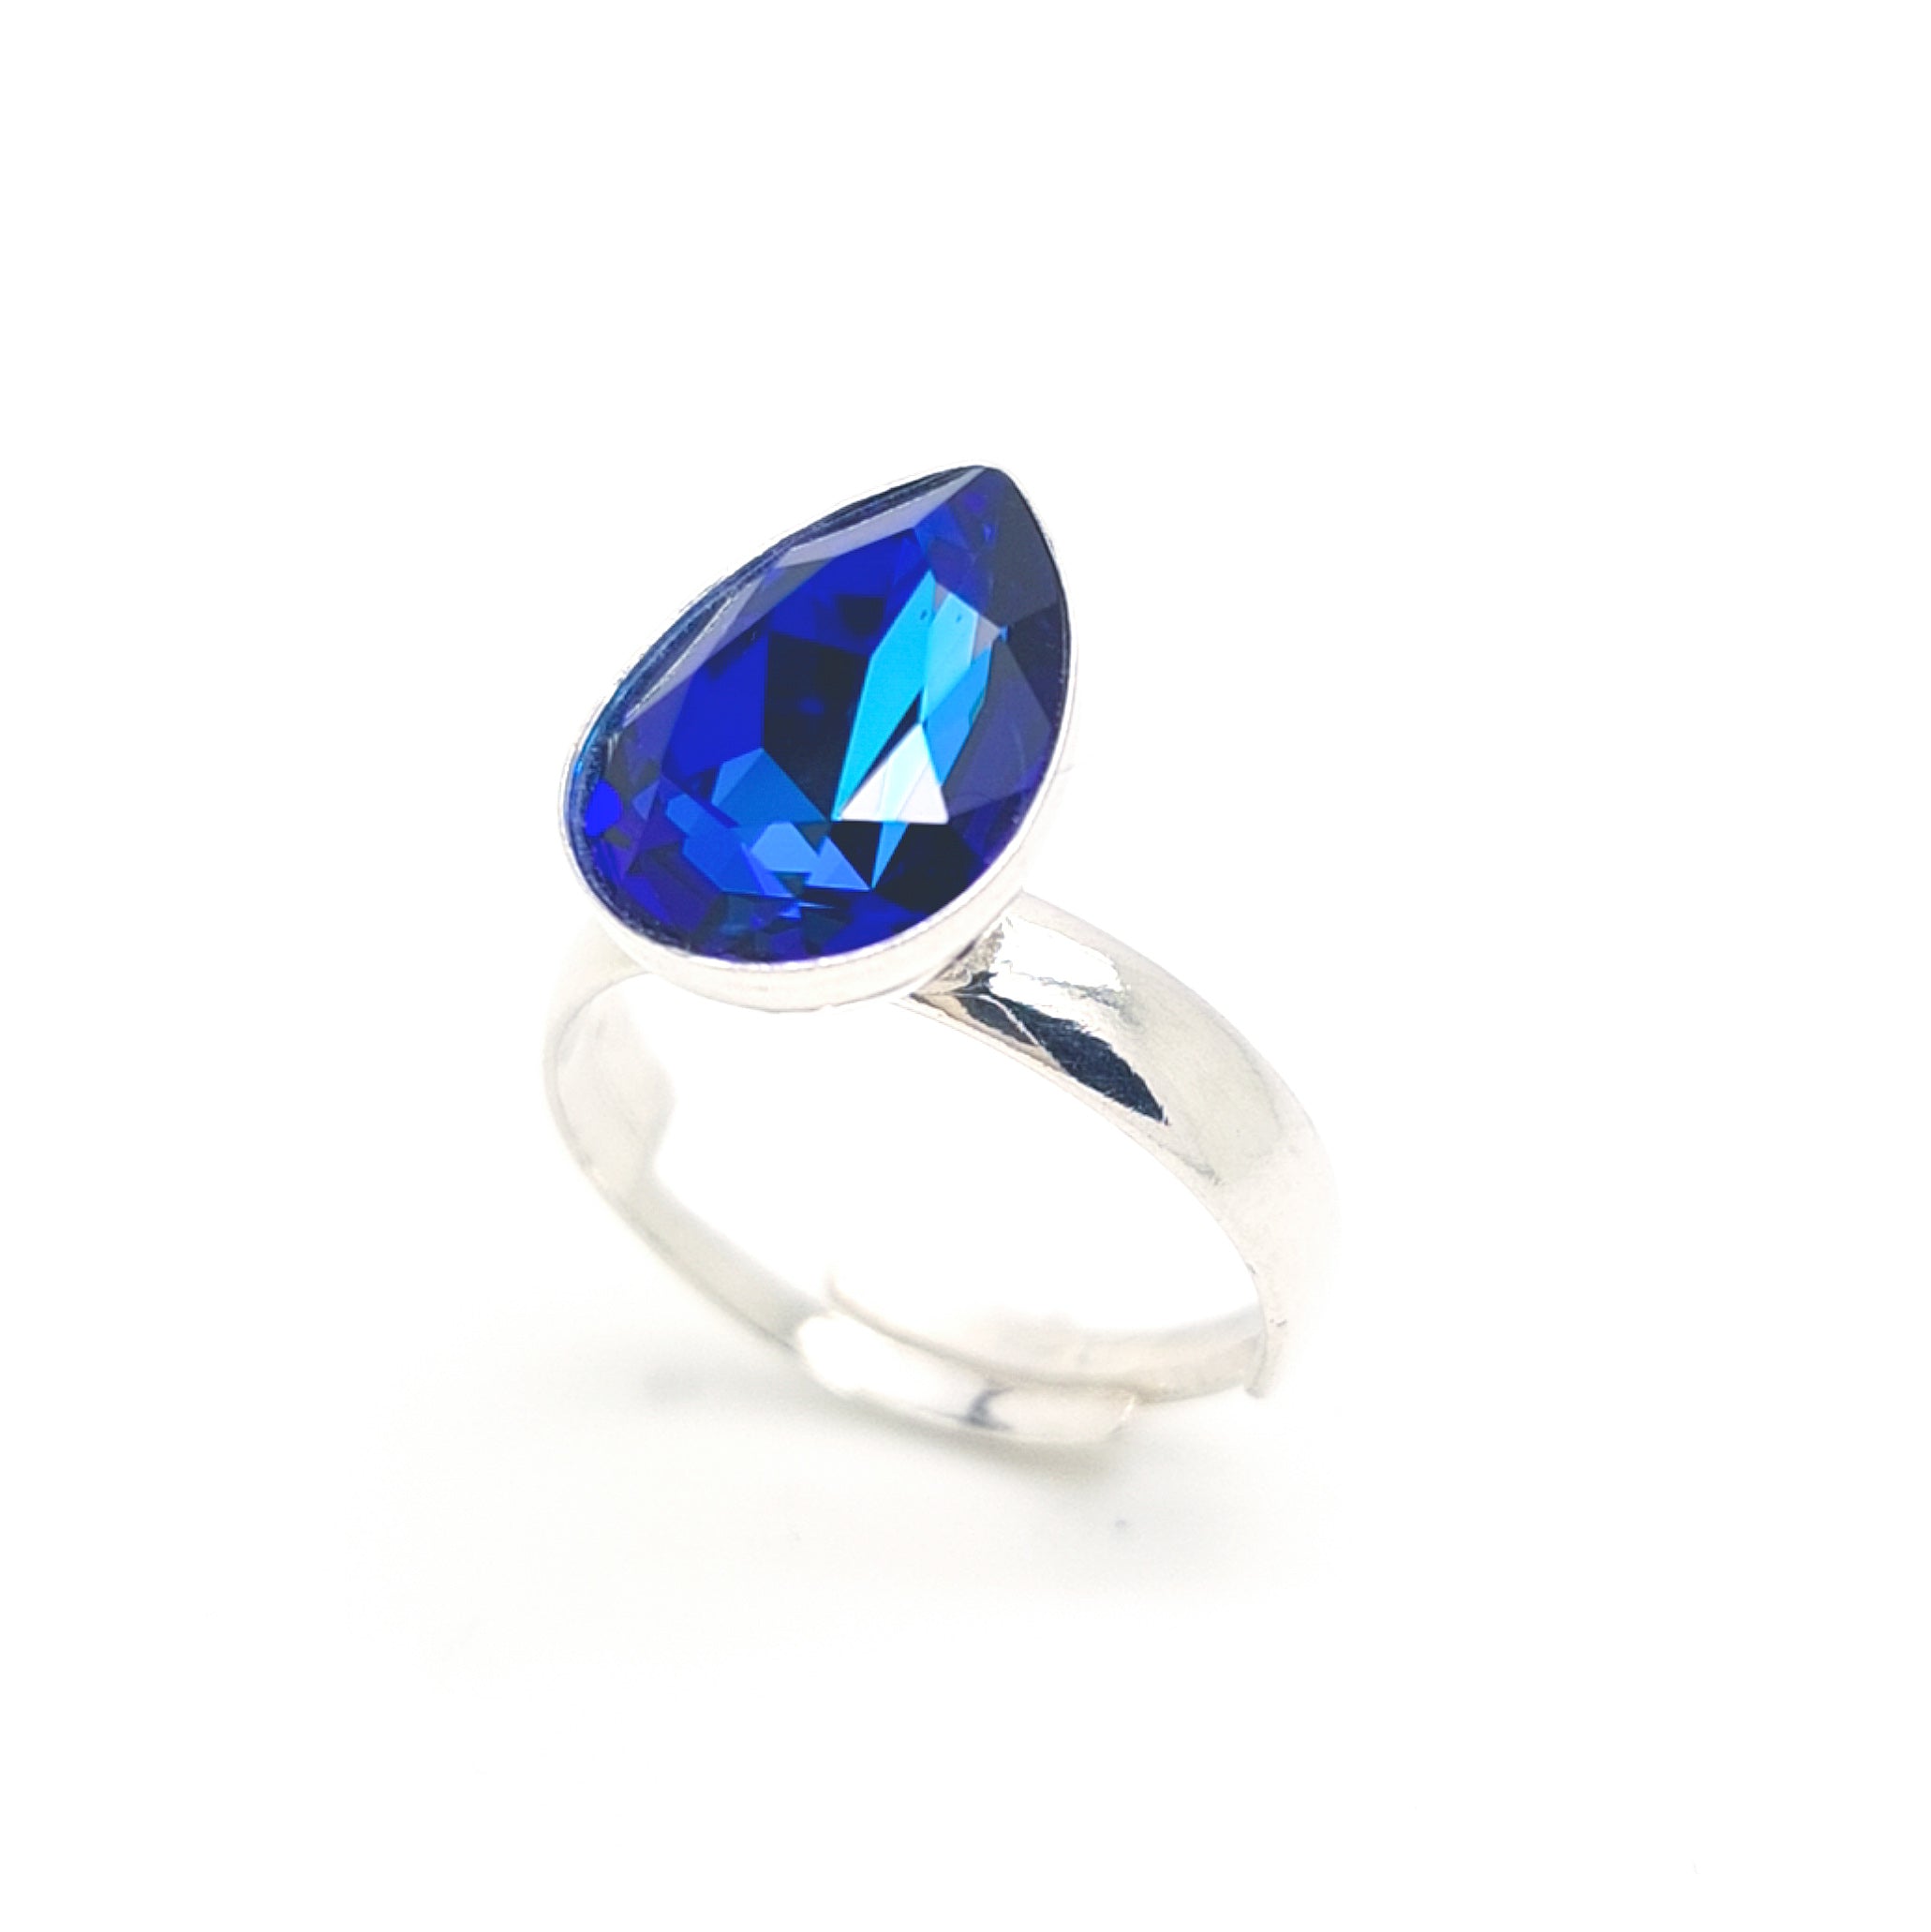 Bermuda Blue Solitaire Silver Ring in Nickel-Free Sterling Silver by Magpie Gems.